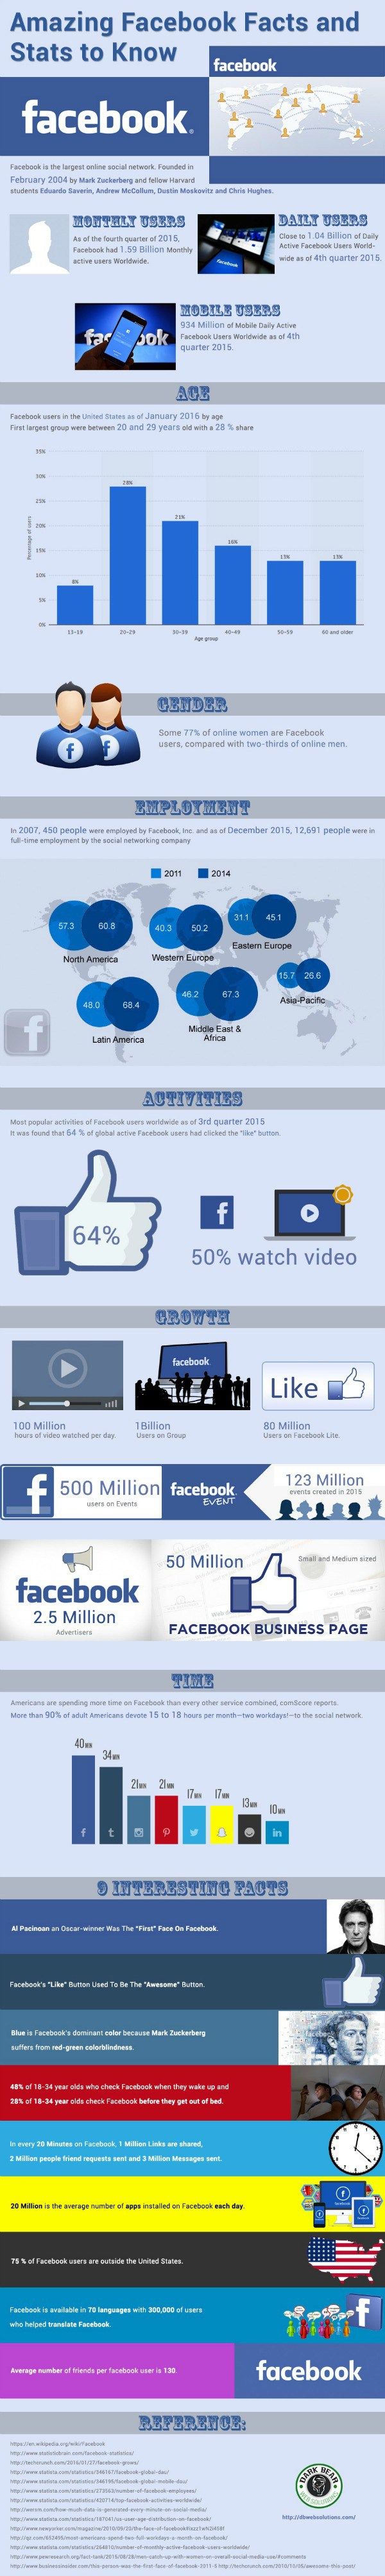 Advertising-Infographics-Facebook-Facts-and-Stats-Infographic Advertising Infographics : Facebook Facts and Stats Infographic